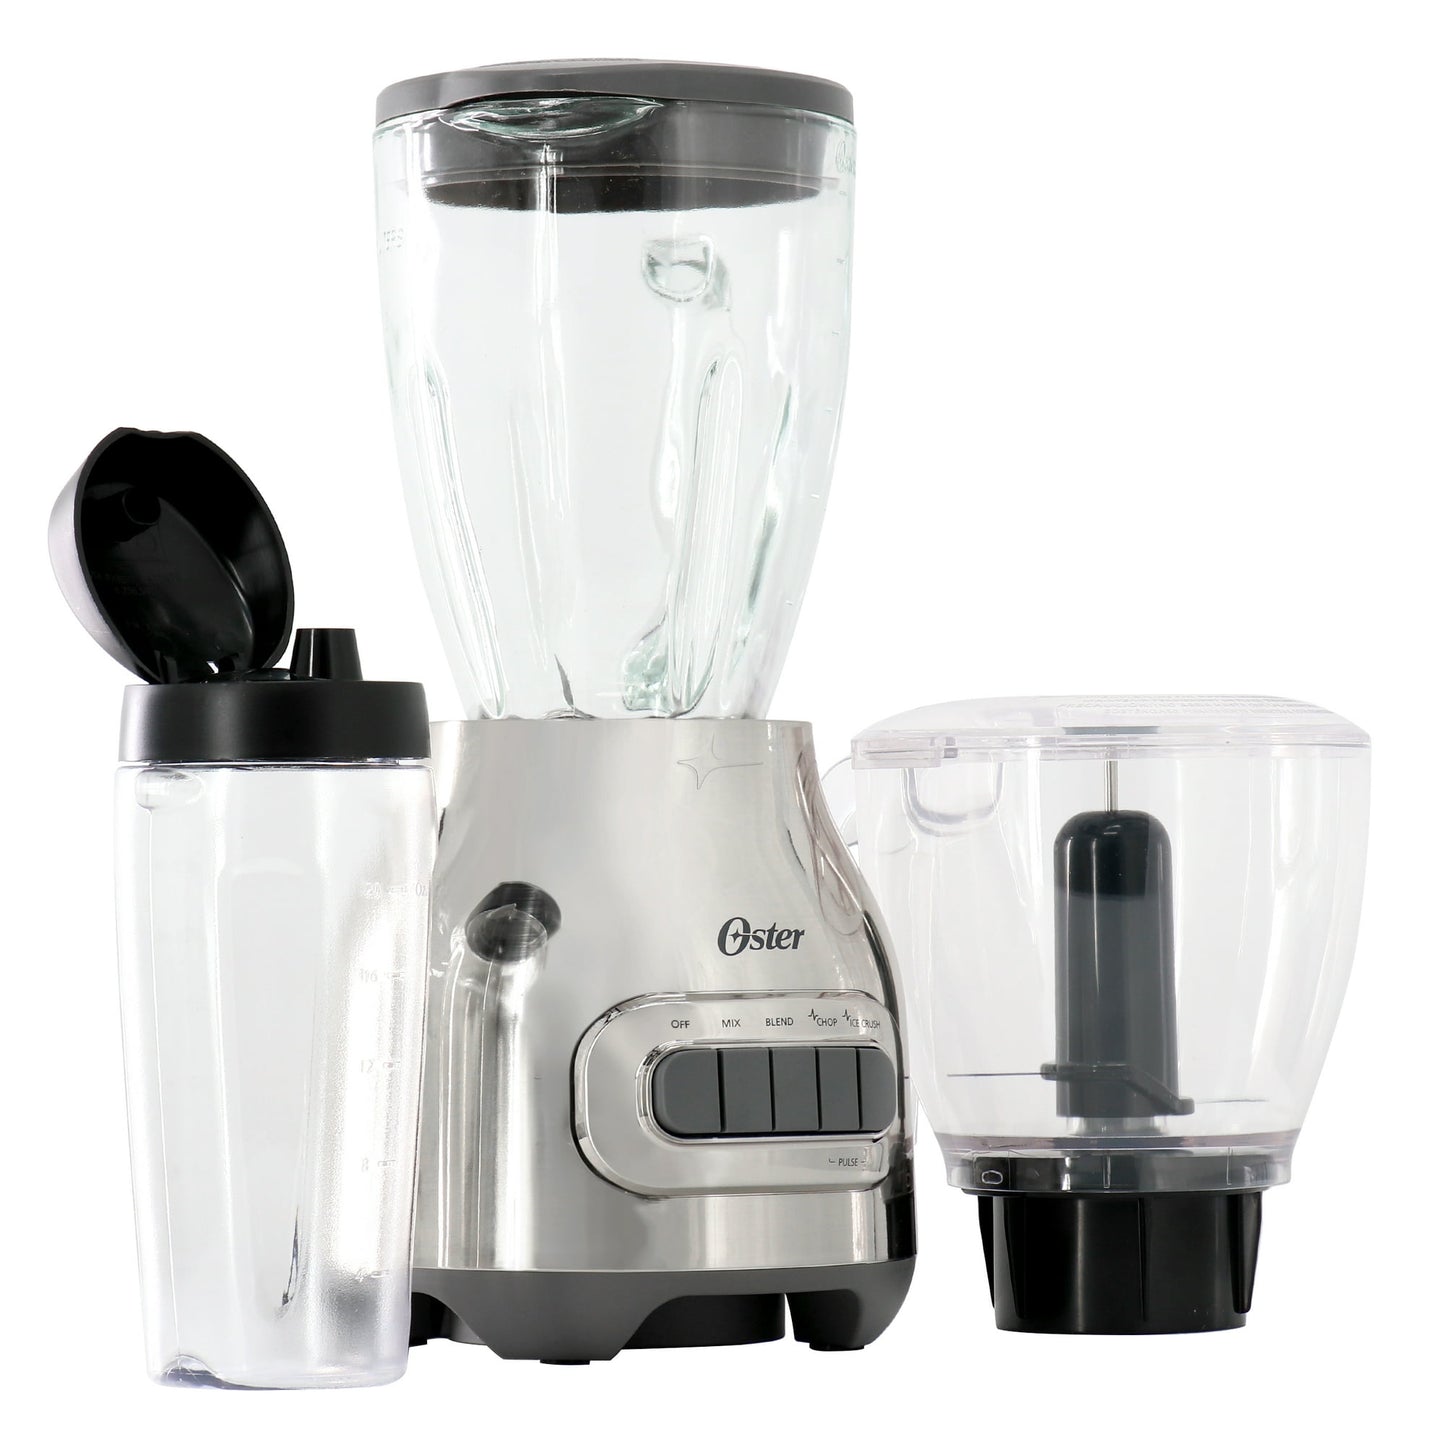 Oster 3-in-1 Kitchen System 700 Watt Blender with Blend-N-Go Cup in Chrome